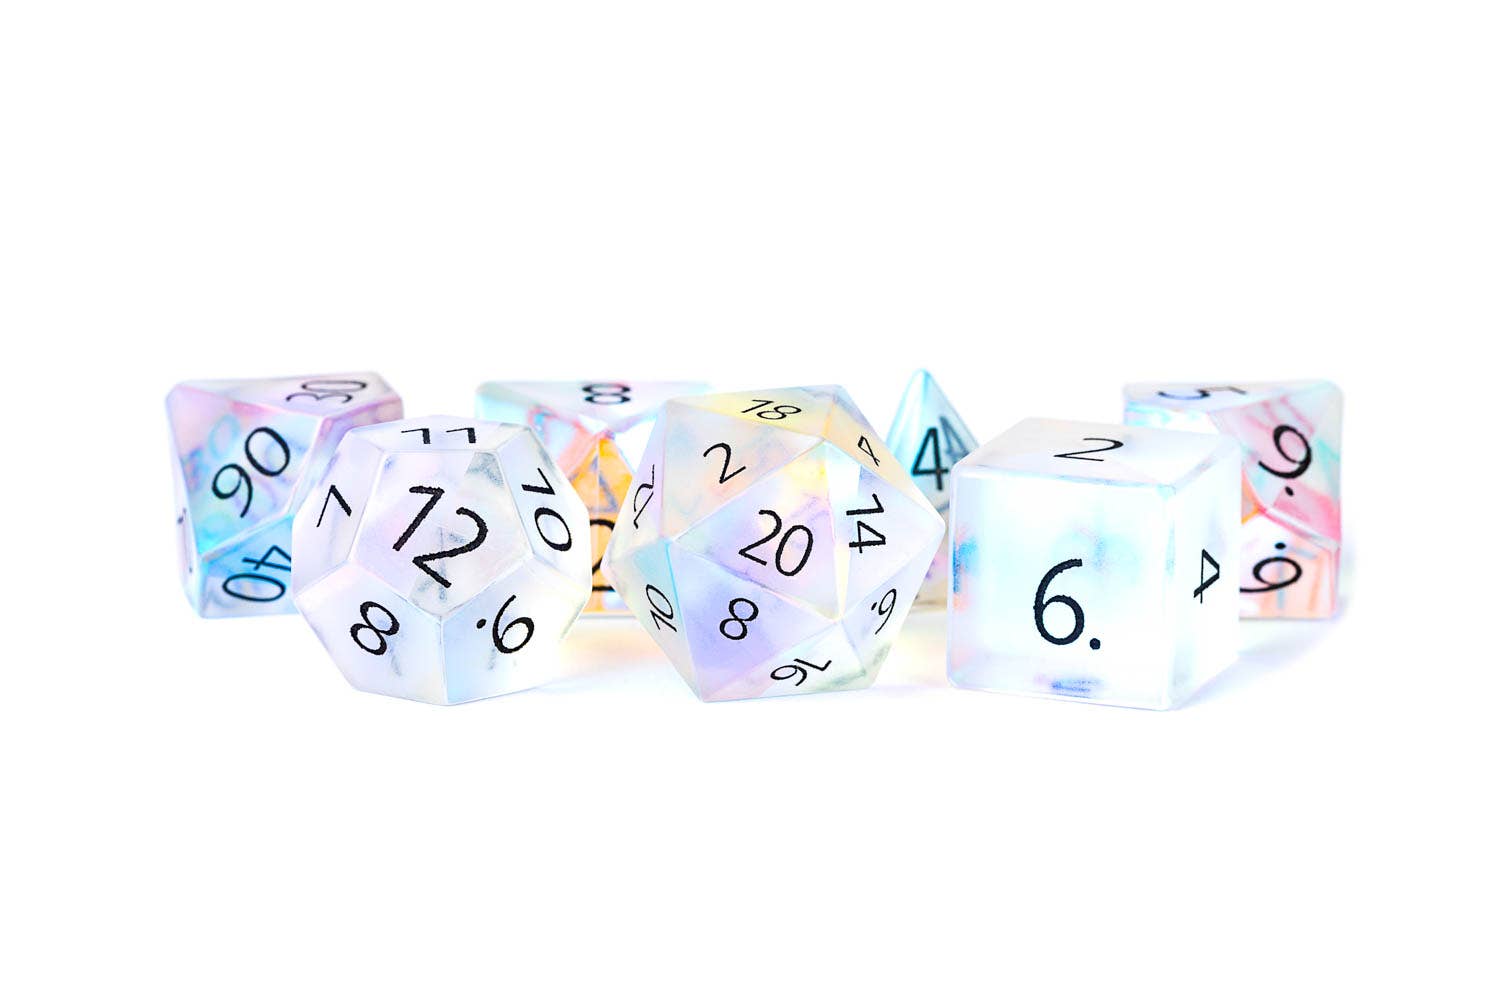 Engraved Frosted Rainbow Glass - Full-Sized 16mm Polyhedral Dice Set - Space Camp